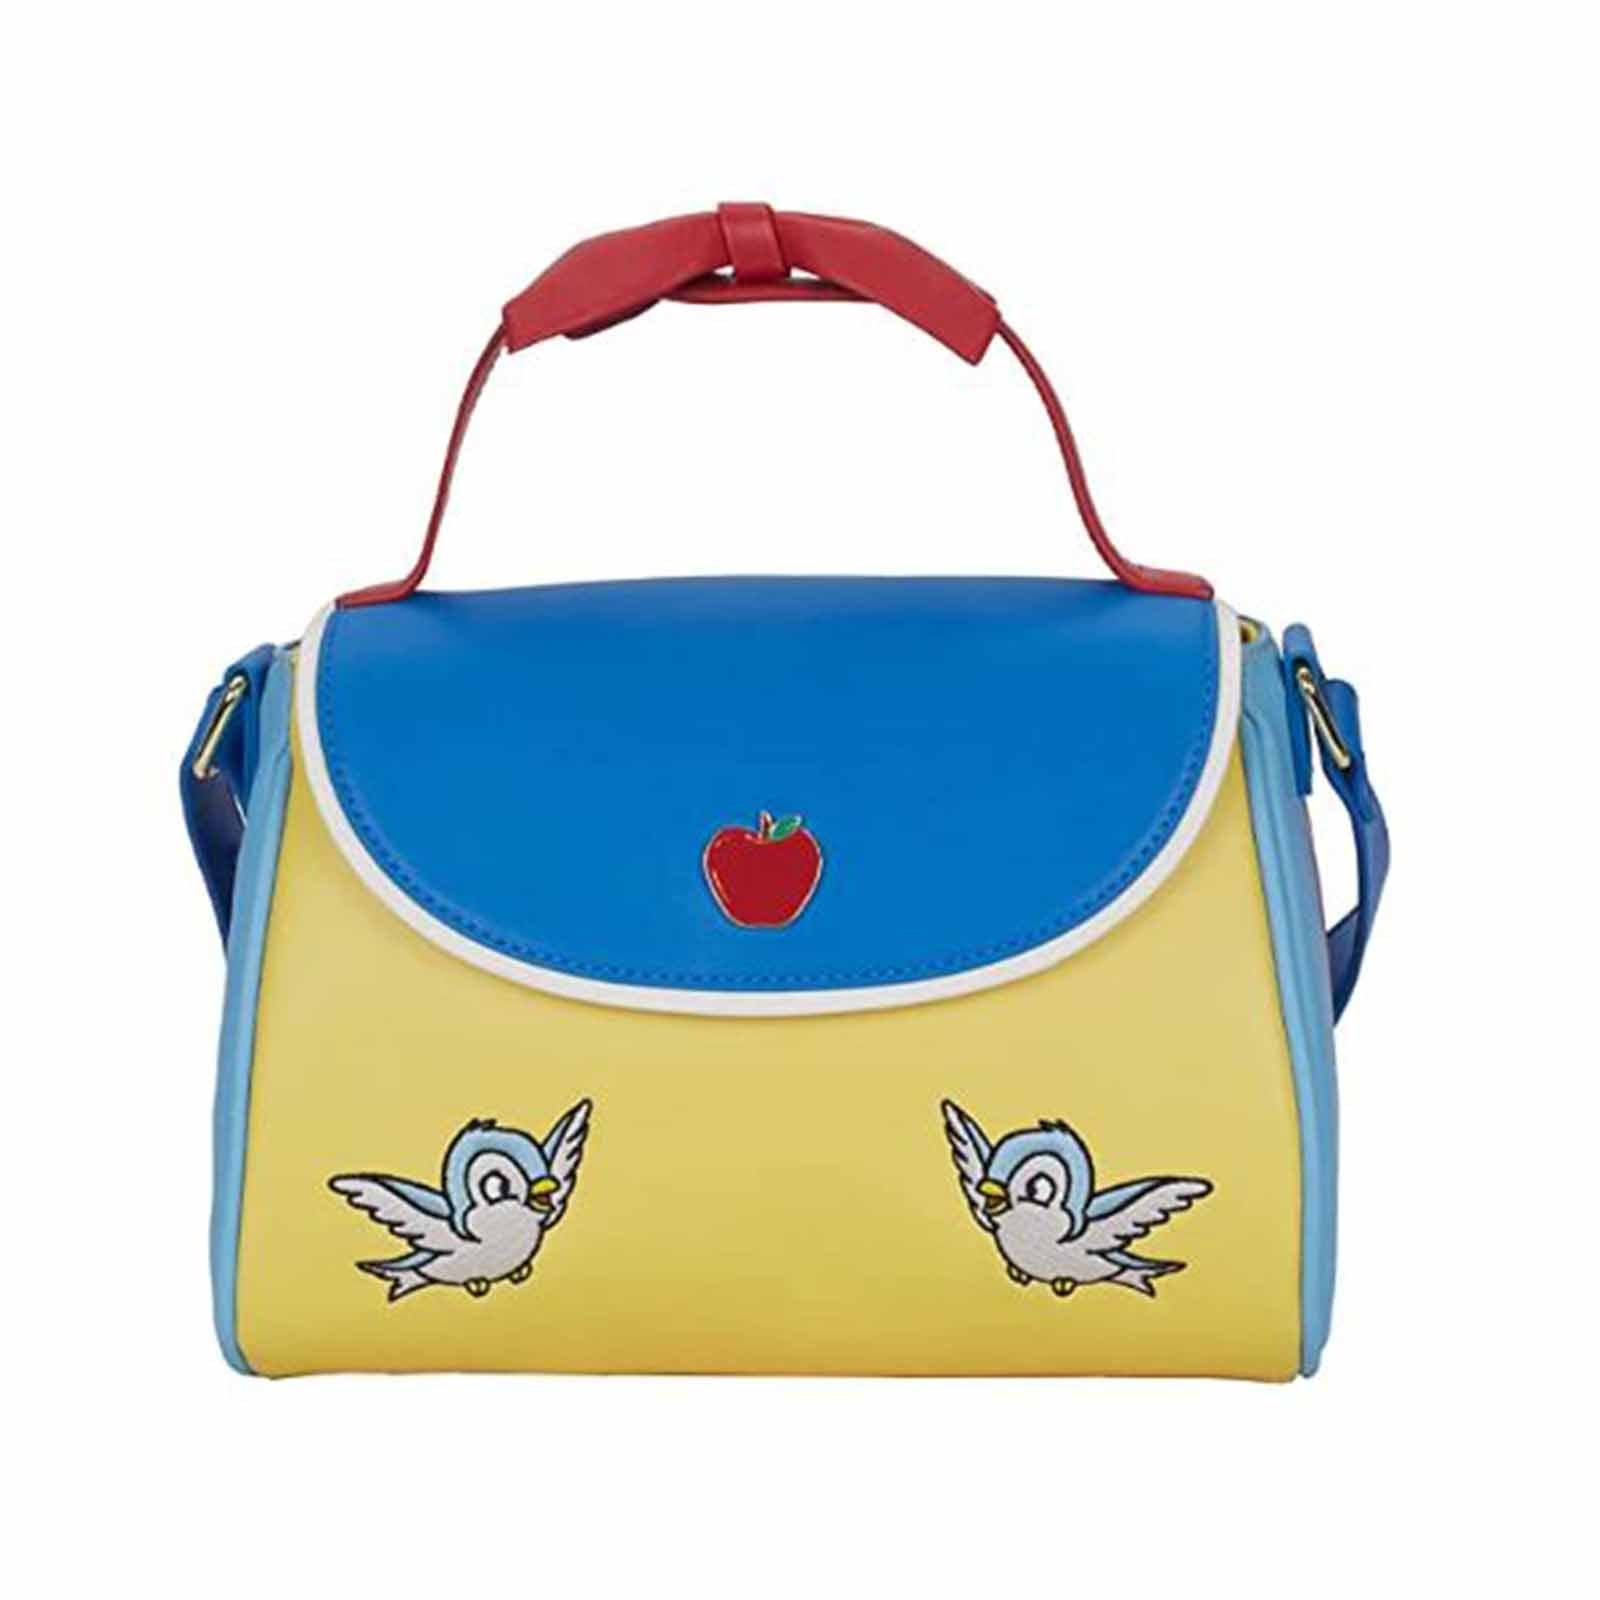 Snow White For Bags